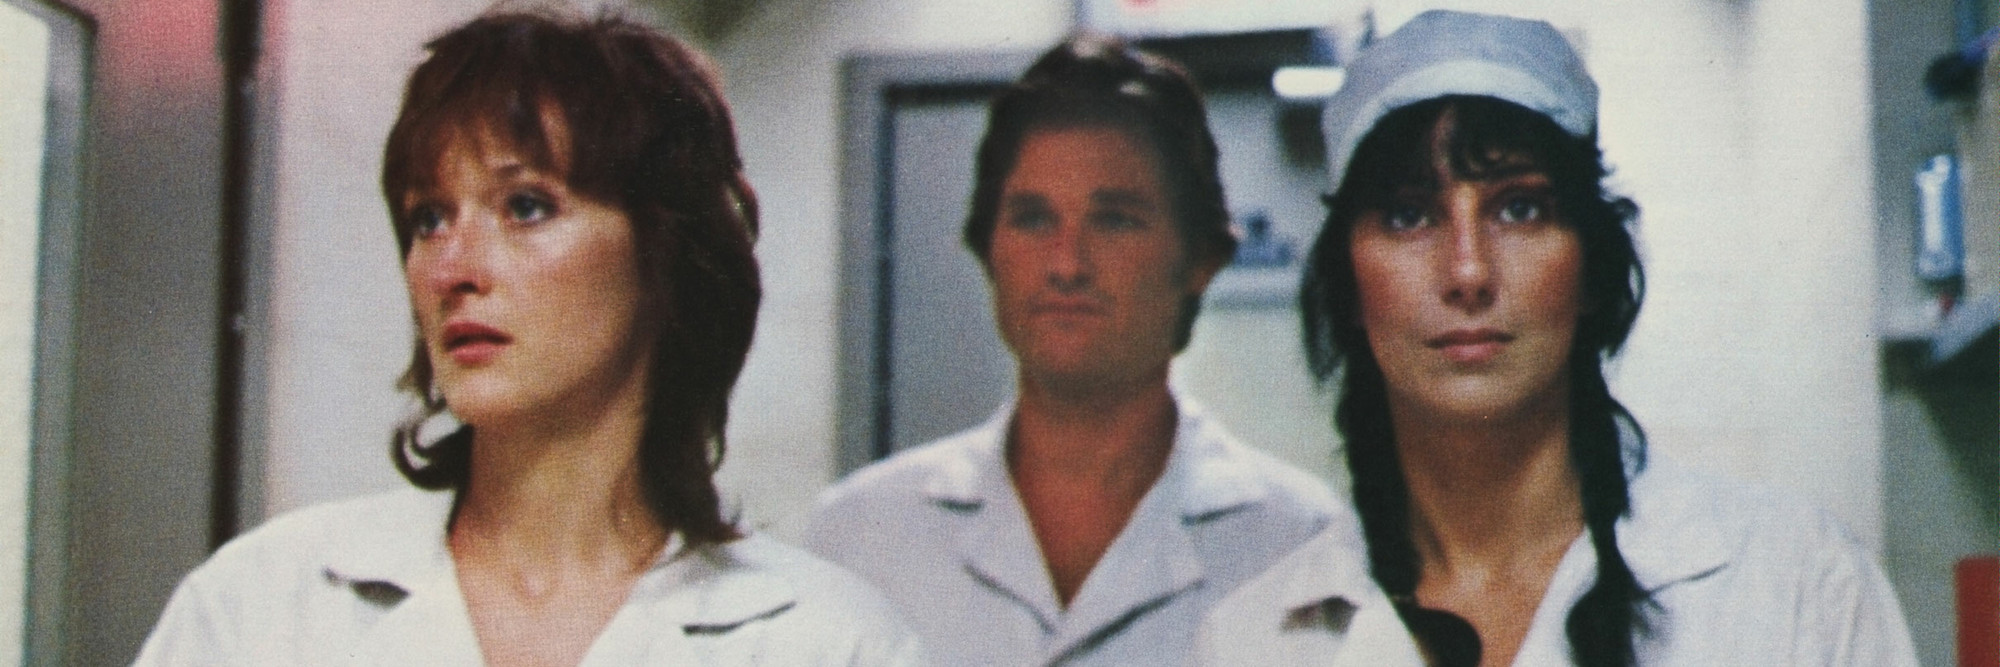 Silkwood. 1982. USA. Directed by Mike Nichols. Courtesy of Photofest